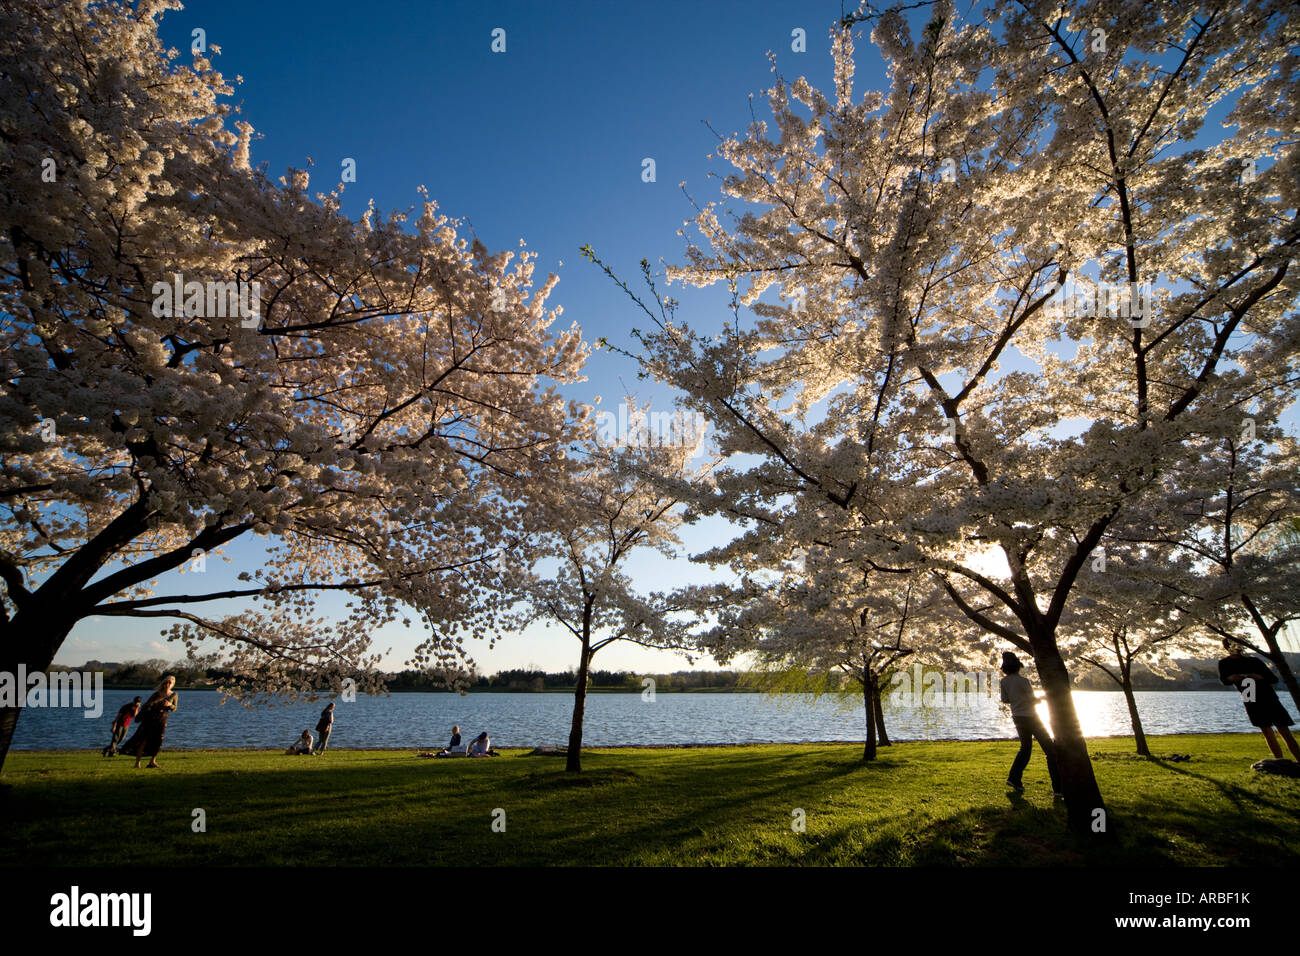 People celebrating spring under flowering cherry trees along the Potomac River in Washington DC Stock Photo